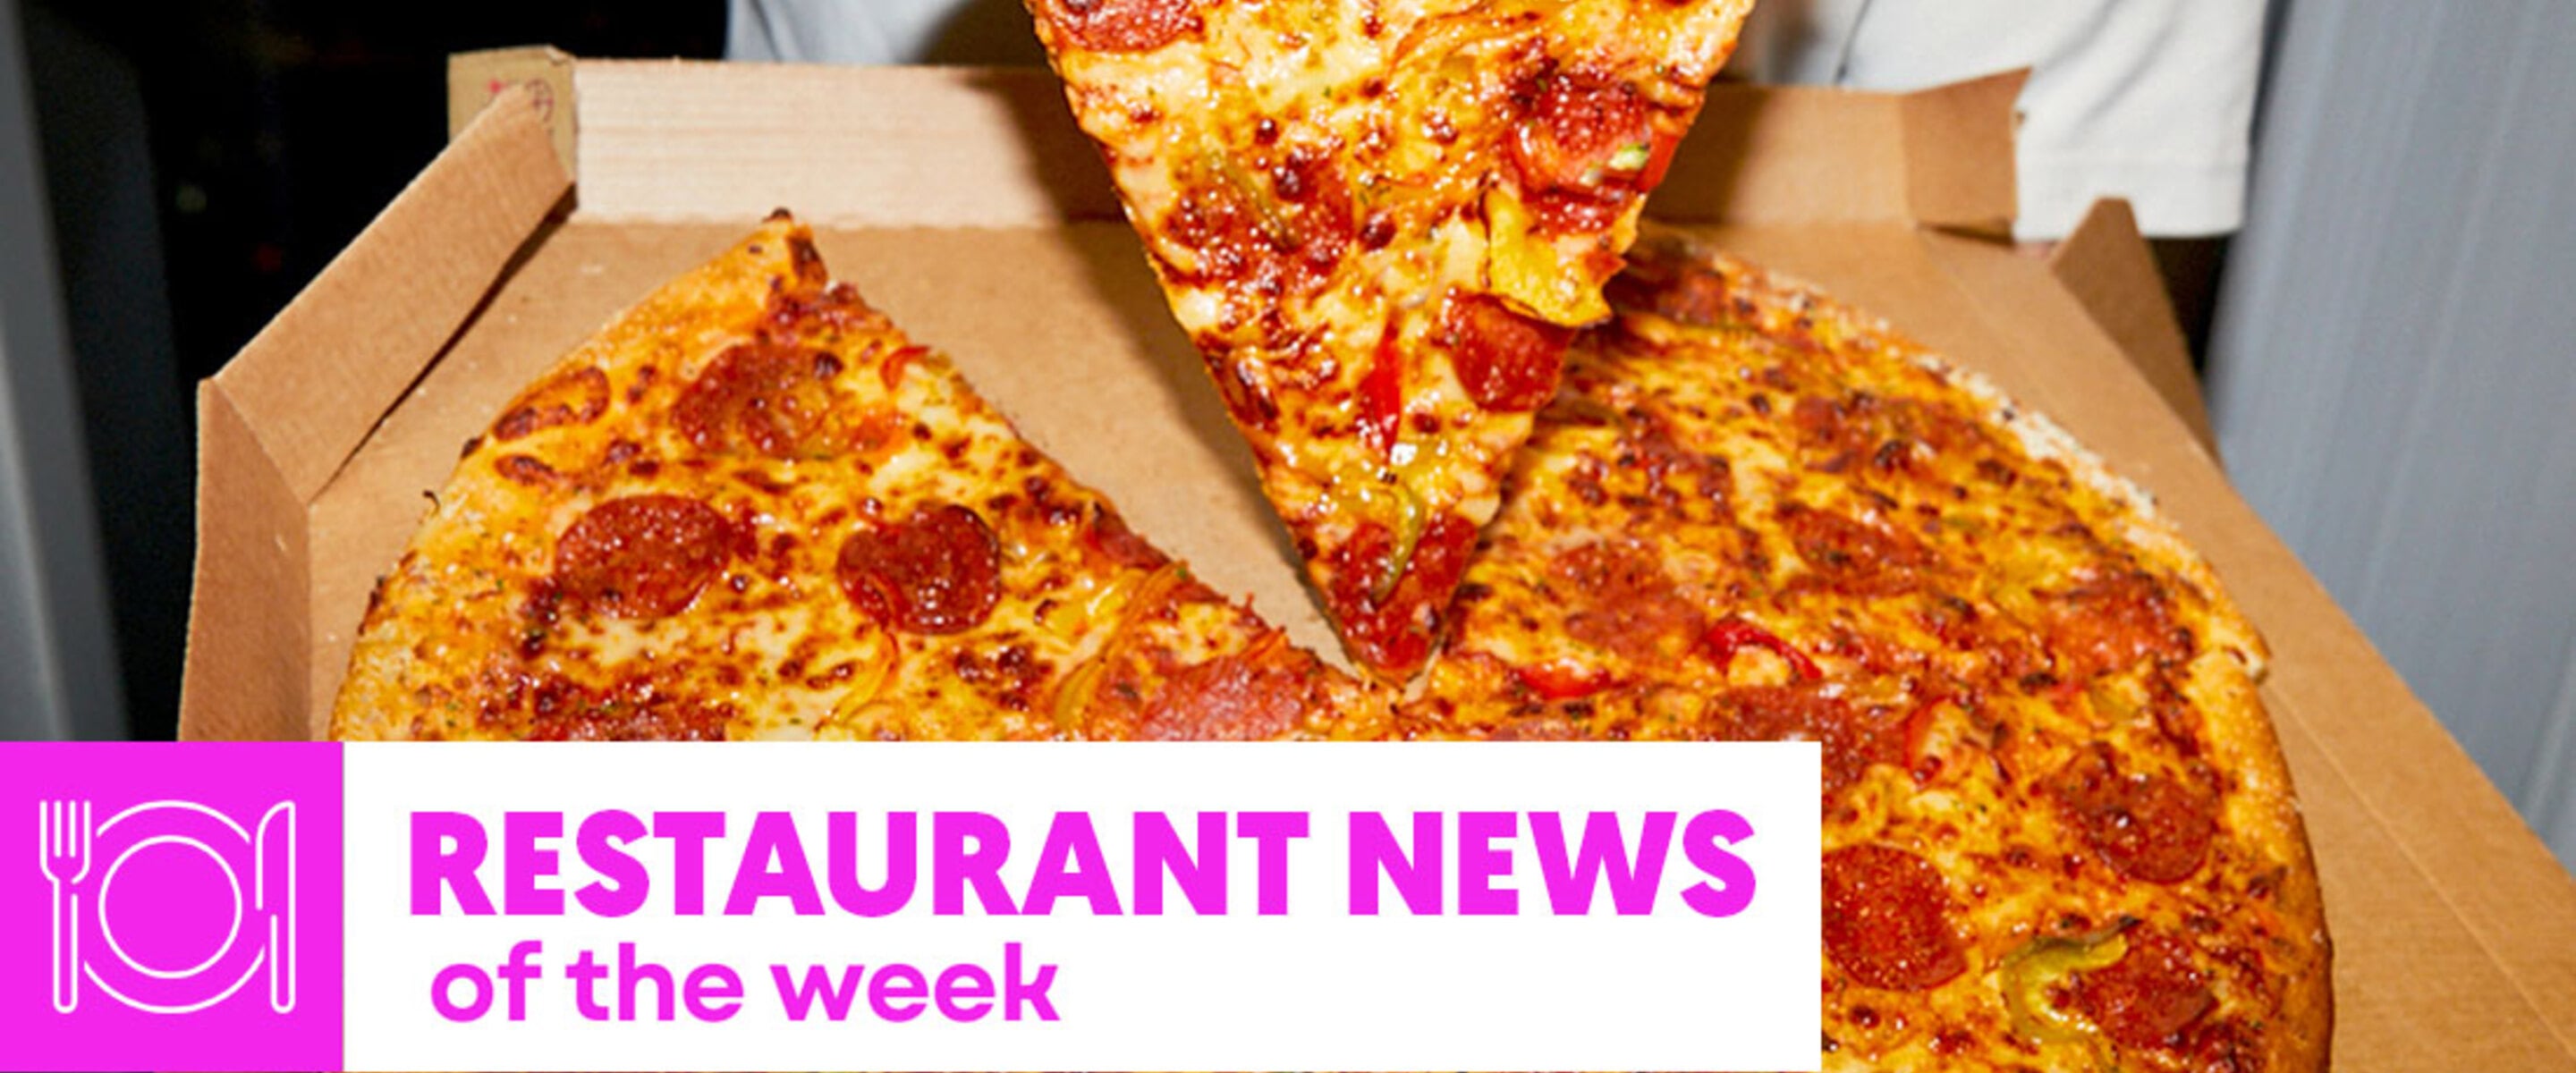 Vegan Restaurant News of the Week: Pizza Hut's Pepperoni, Philly Cheesesteaks, and More